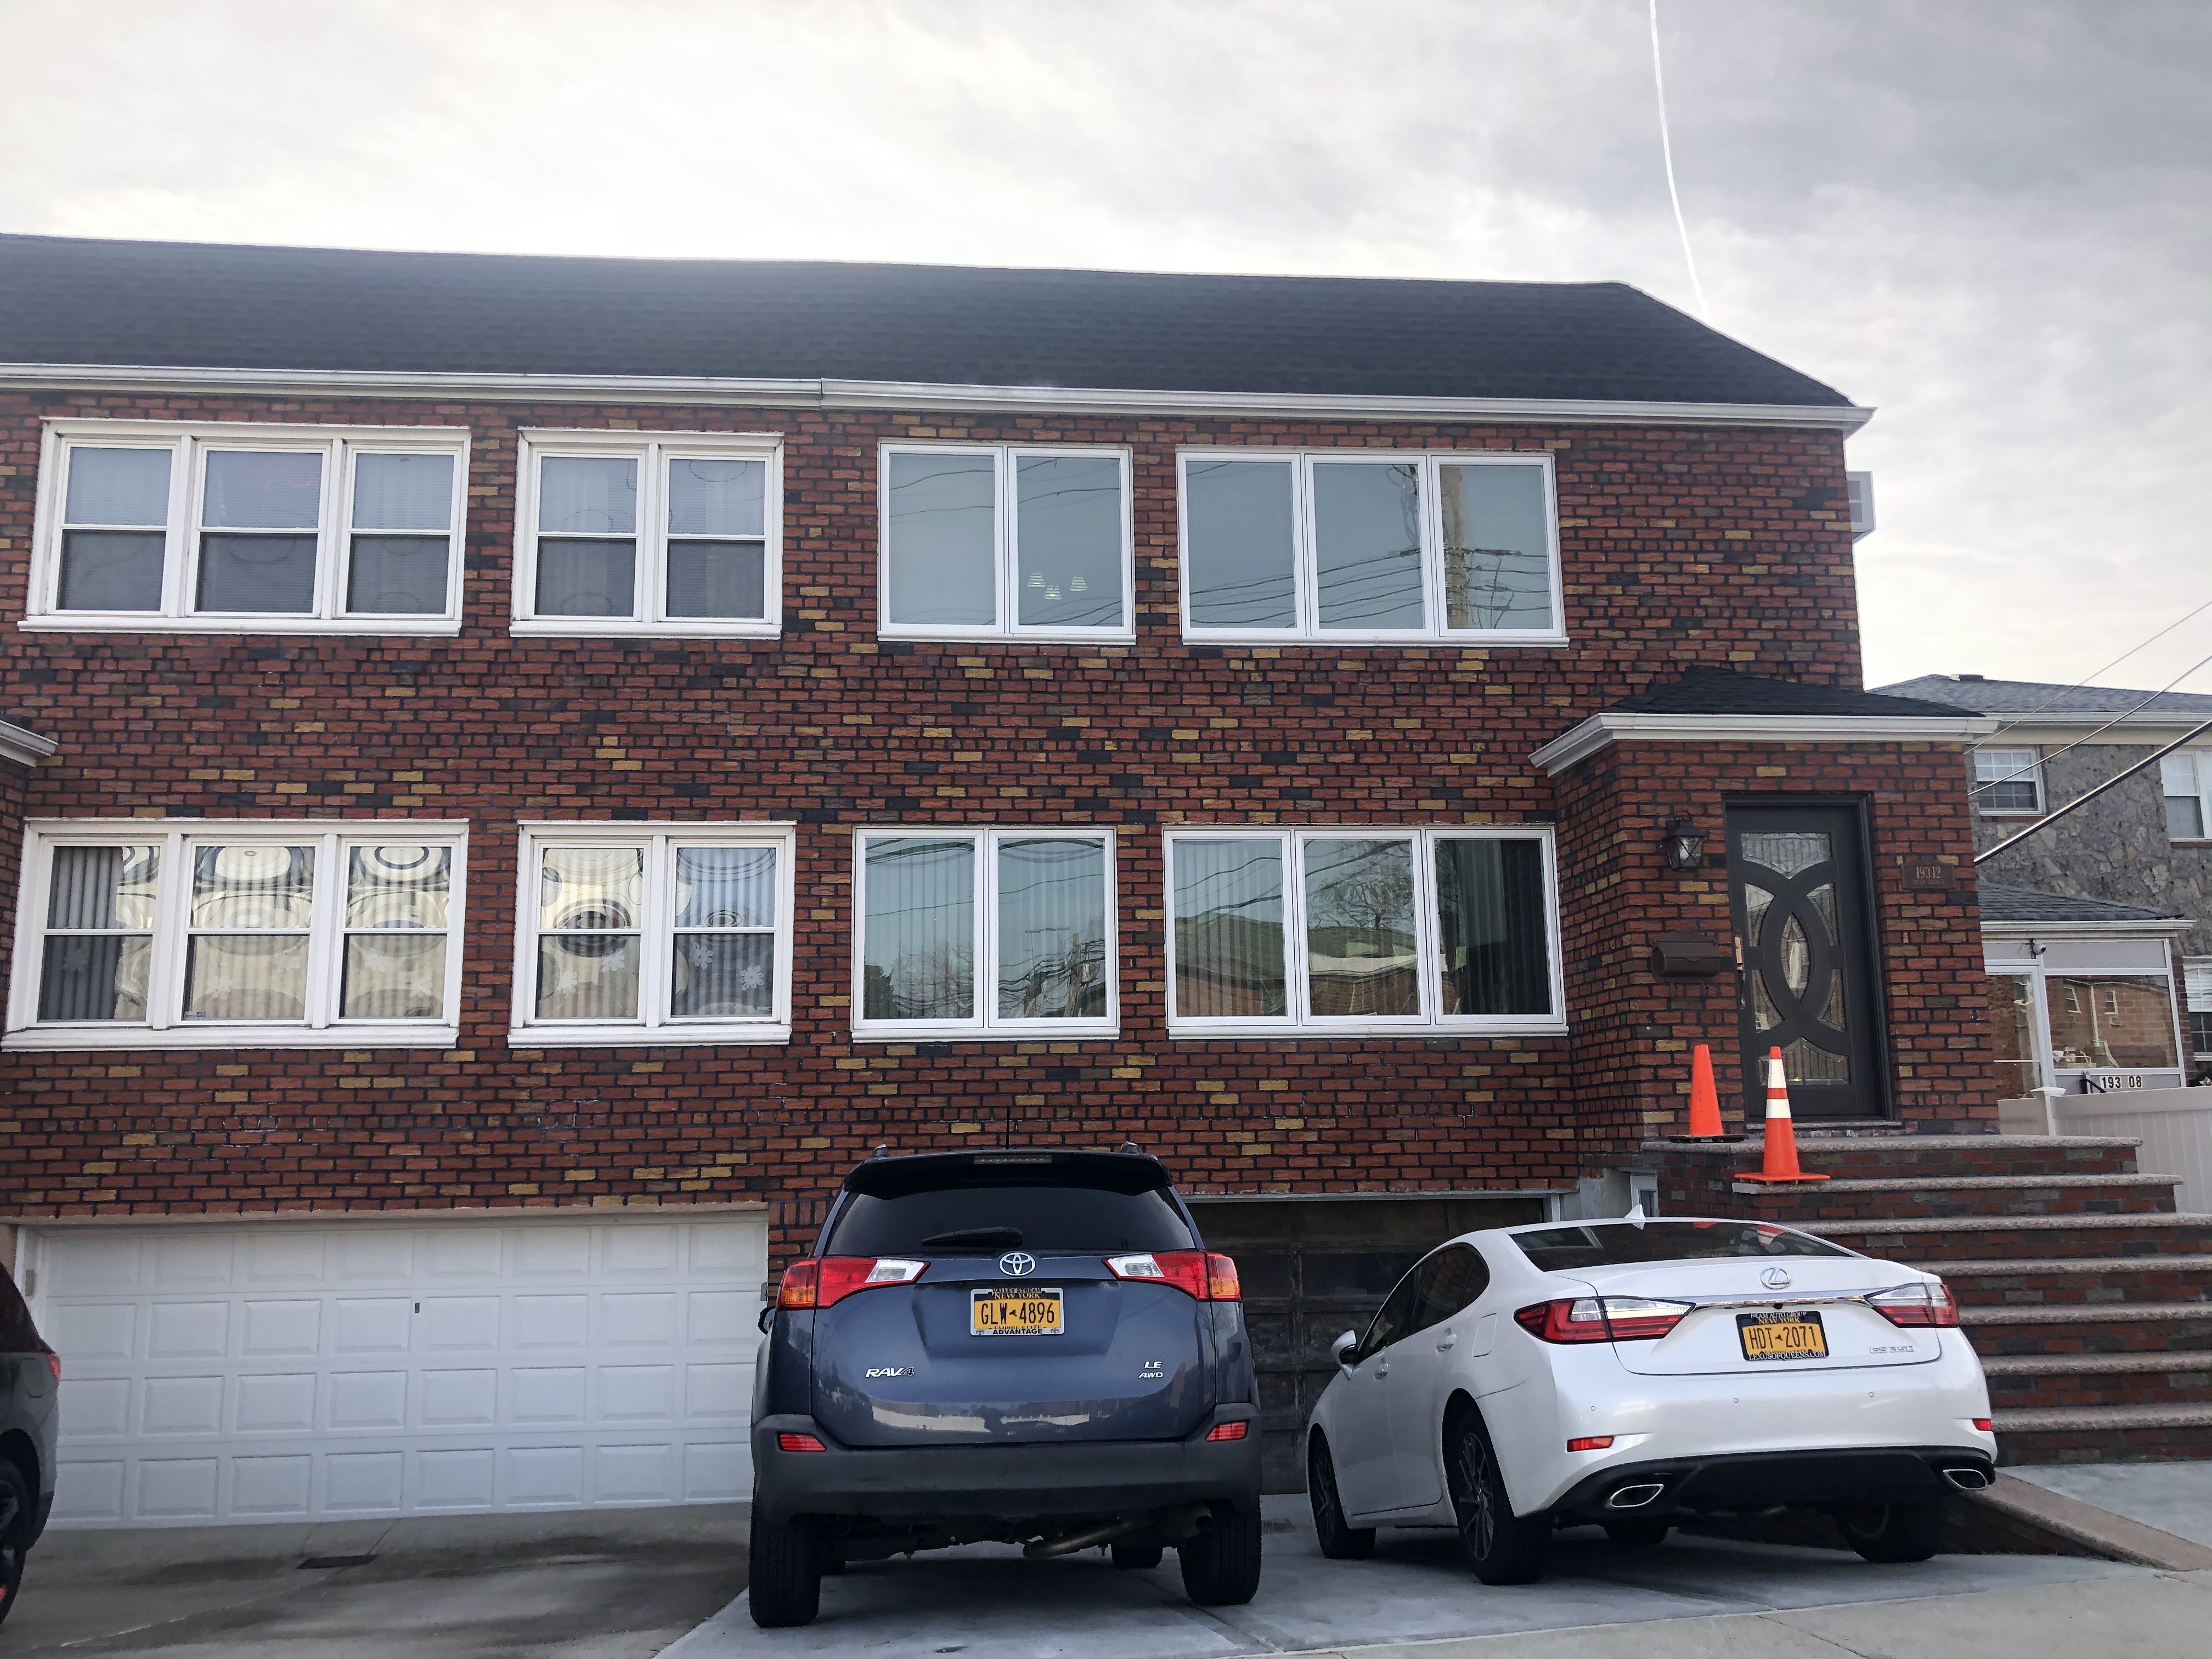 Newly Renovated 3 Bedroom Apartment for Rent. Features Large Living/Dining Room, Kitchen and 1.5 Baths. Hardwood Flooring Throughout. Conveniently Located Near Shopping & Transportation!